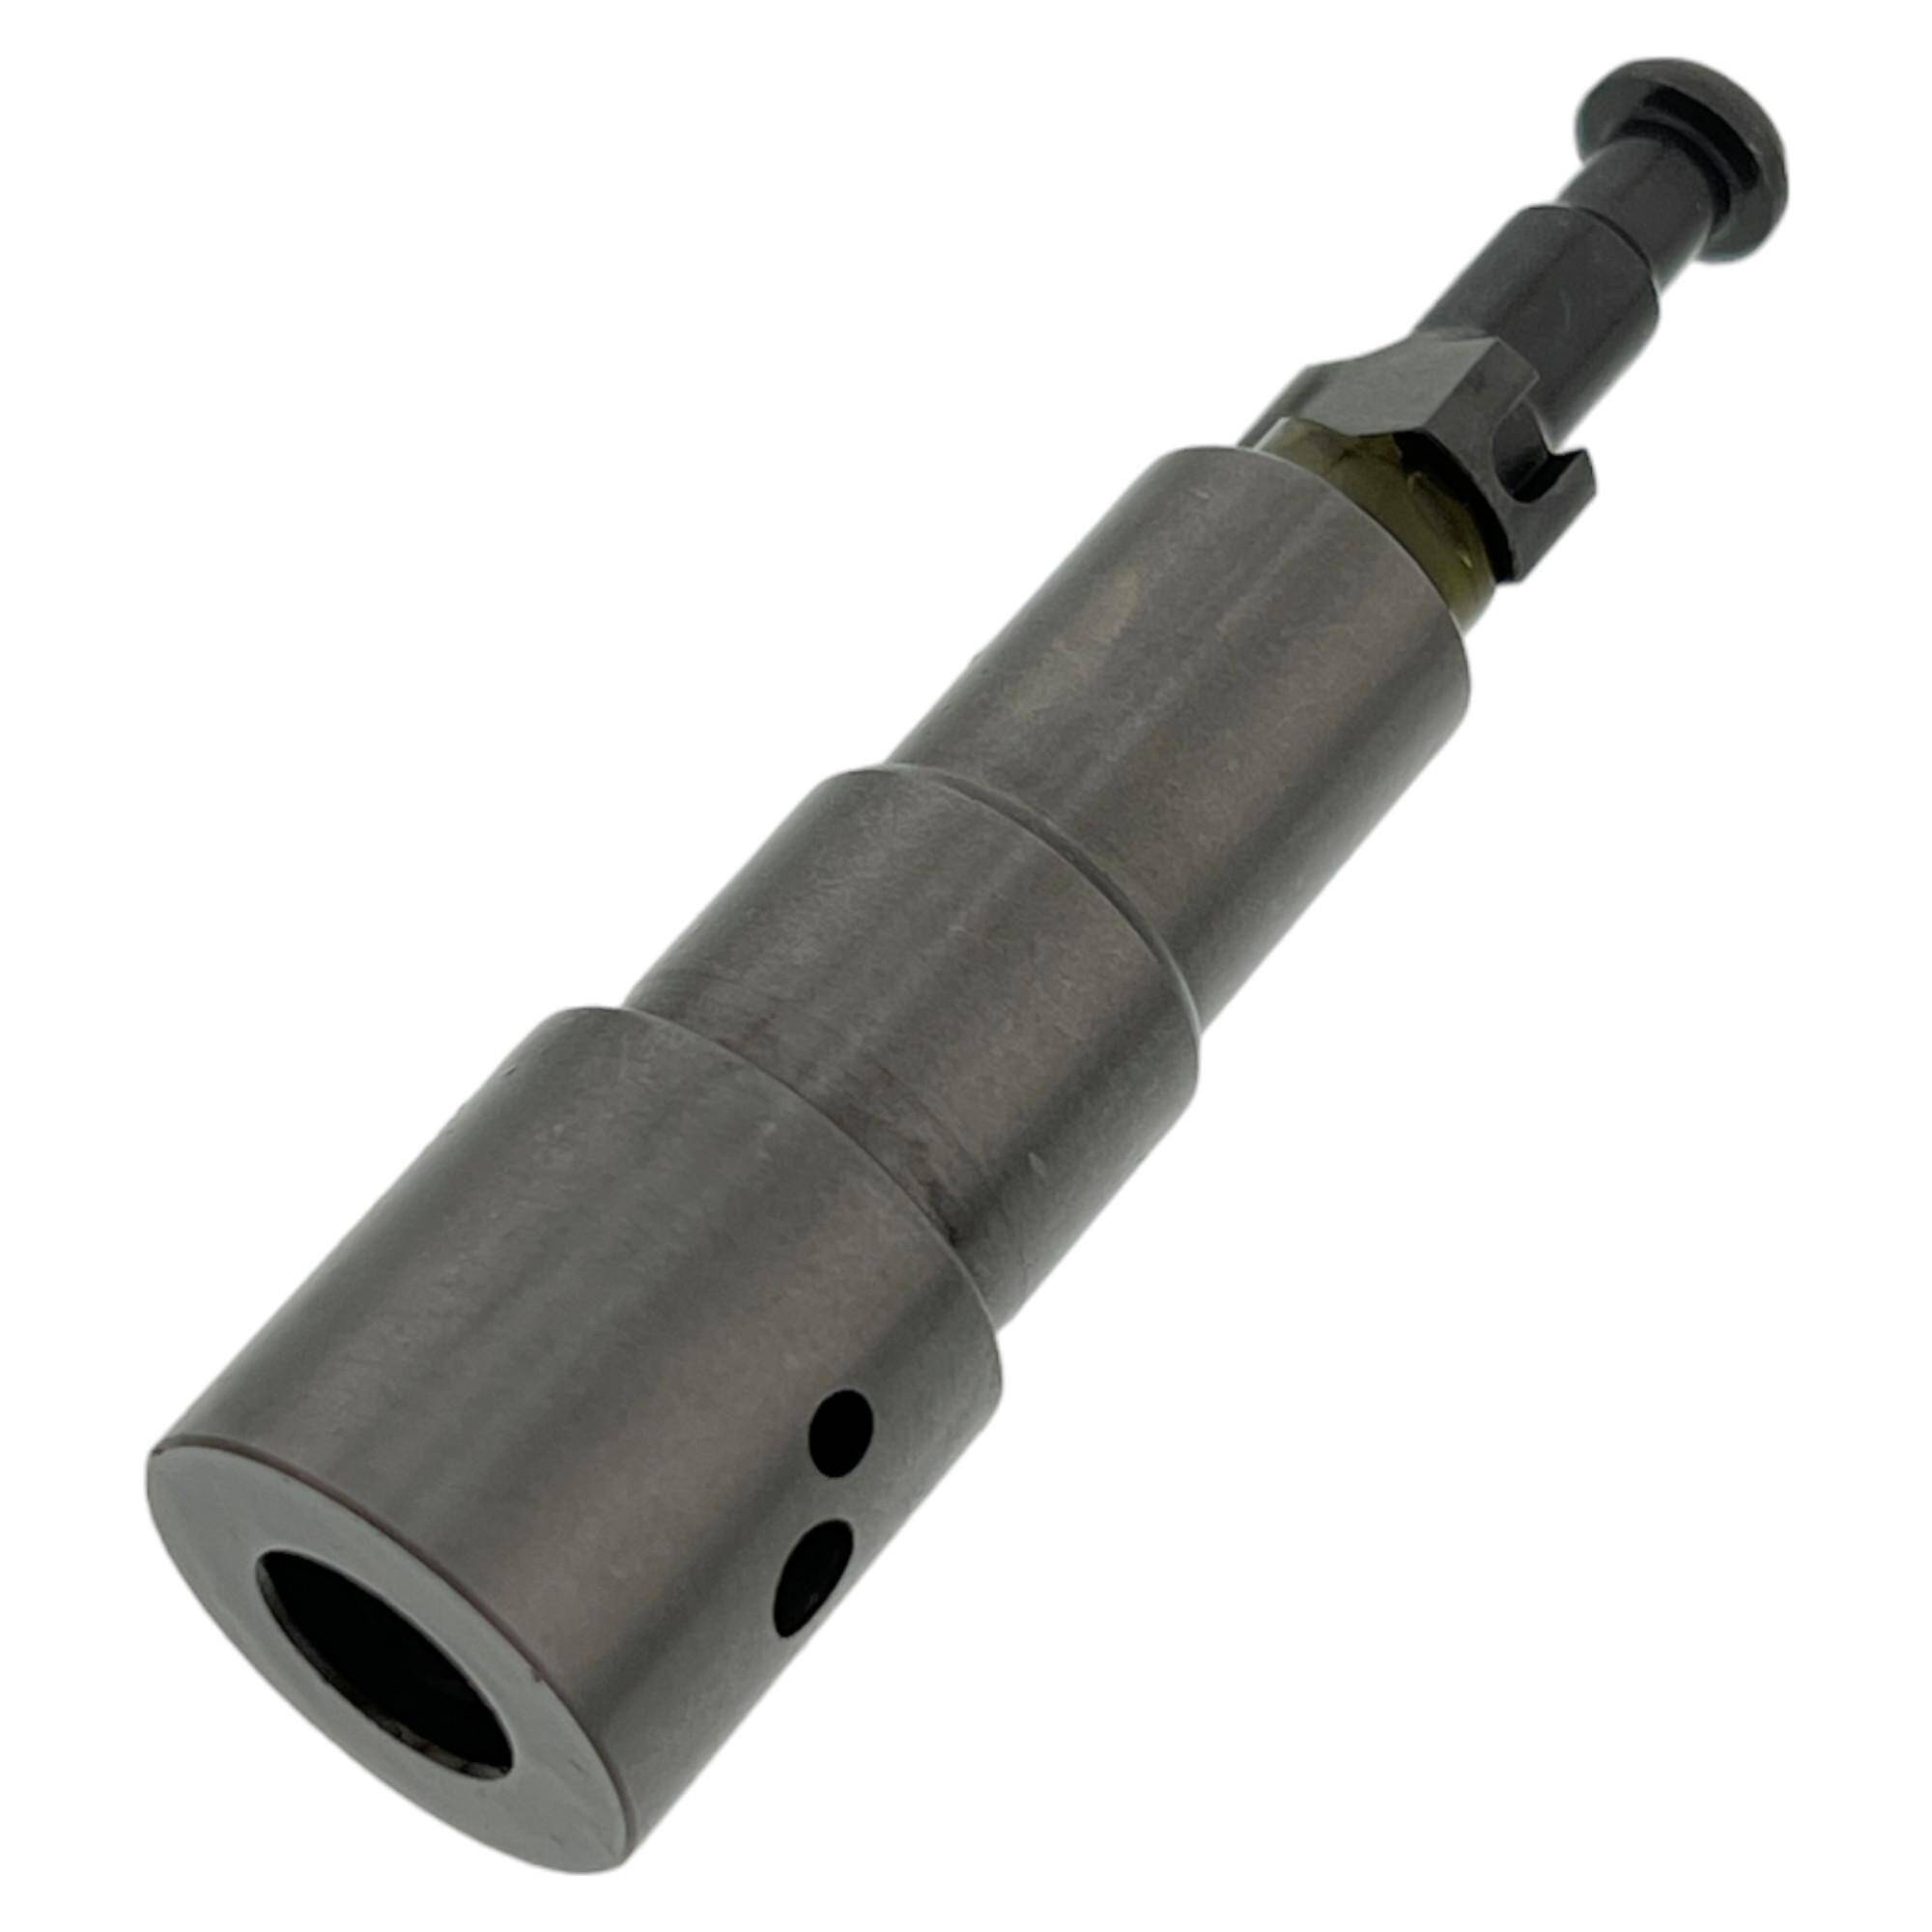 plunger THM-60/1111073 -9mm (07 02 dia9)